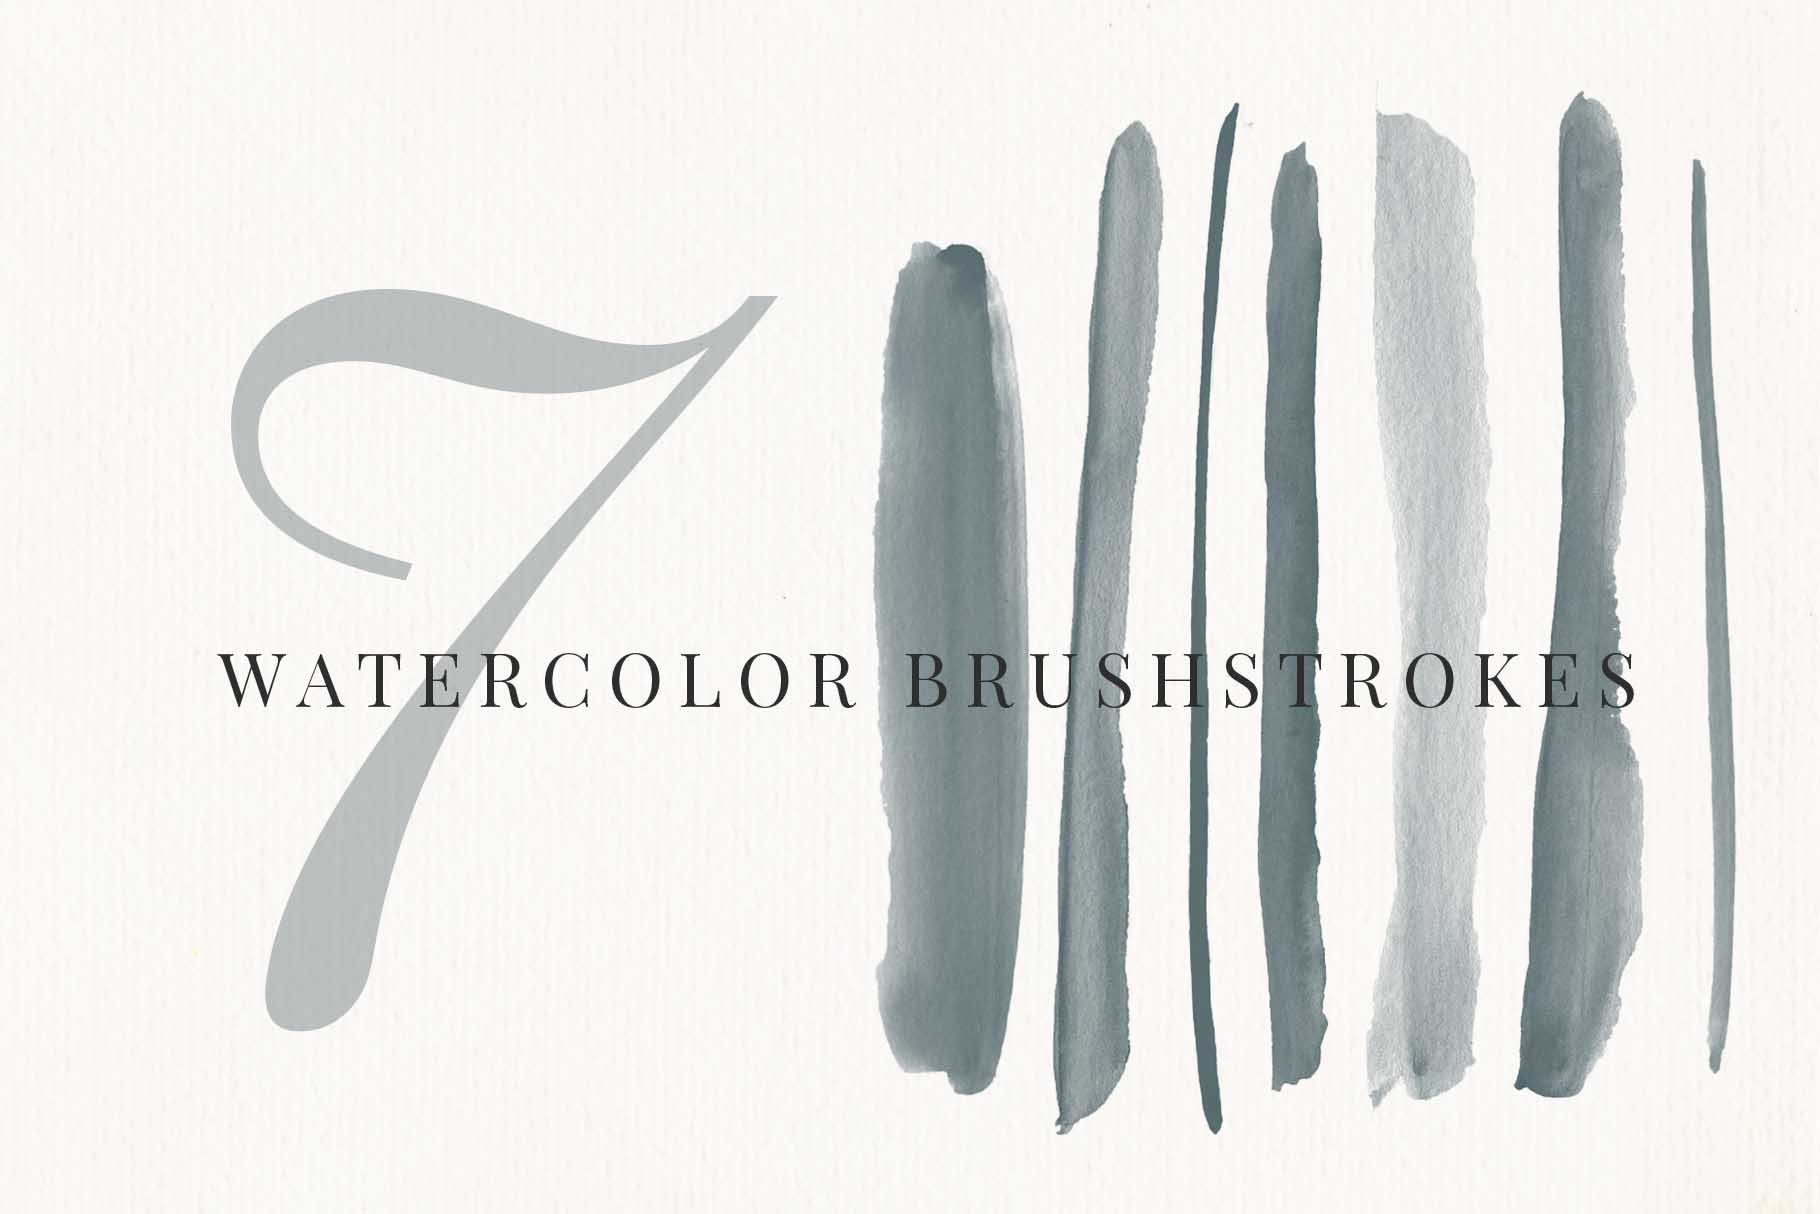 Watercolor Brushstrokes Brush Packpreview image.